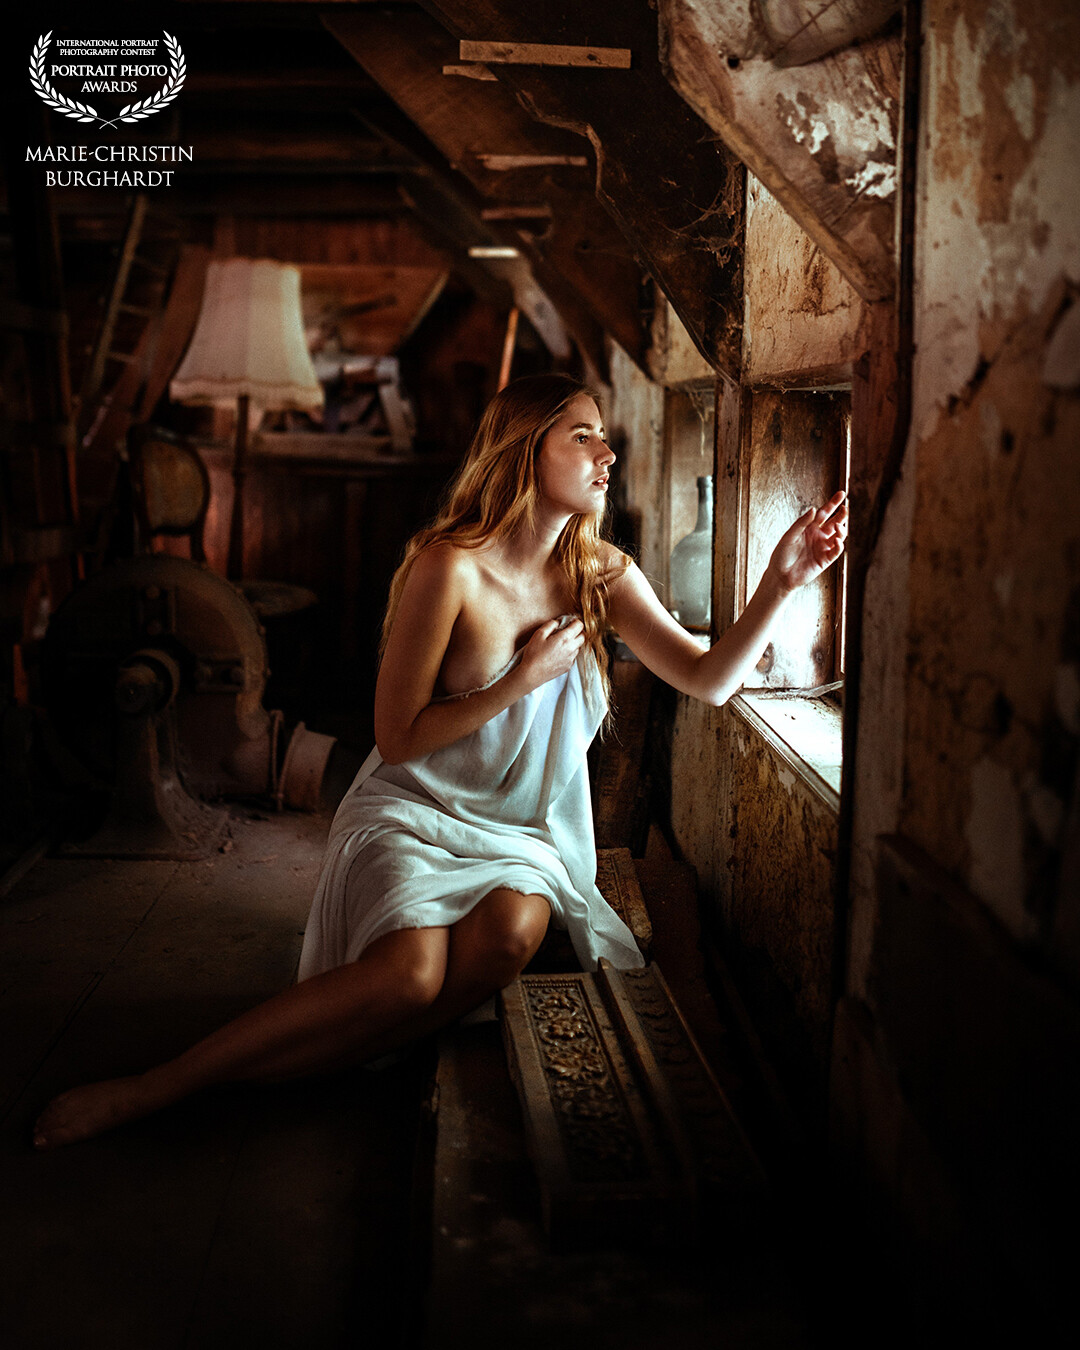 I took this photo on a bookable lost place: an old mill filled with so many beautiful old things like lamps, a piano and even an old bathtub. I'm so glad to had the chance to shoot there together with Michelle. Thanks a lot! <3<br />
<br />
Model: @michelle_maini